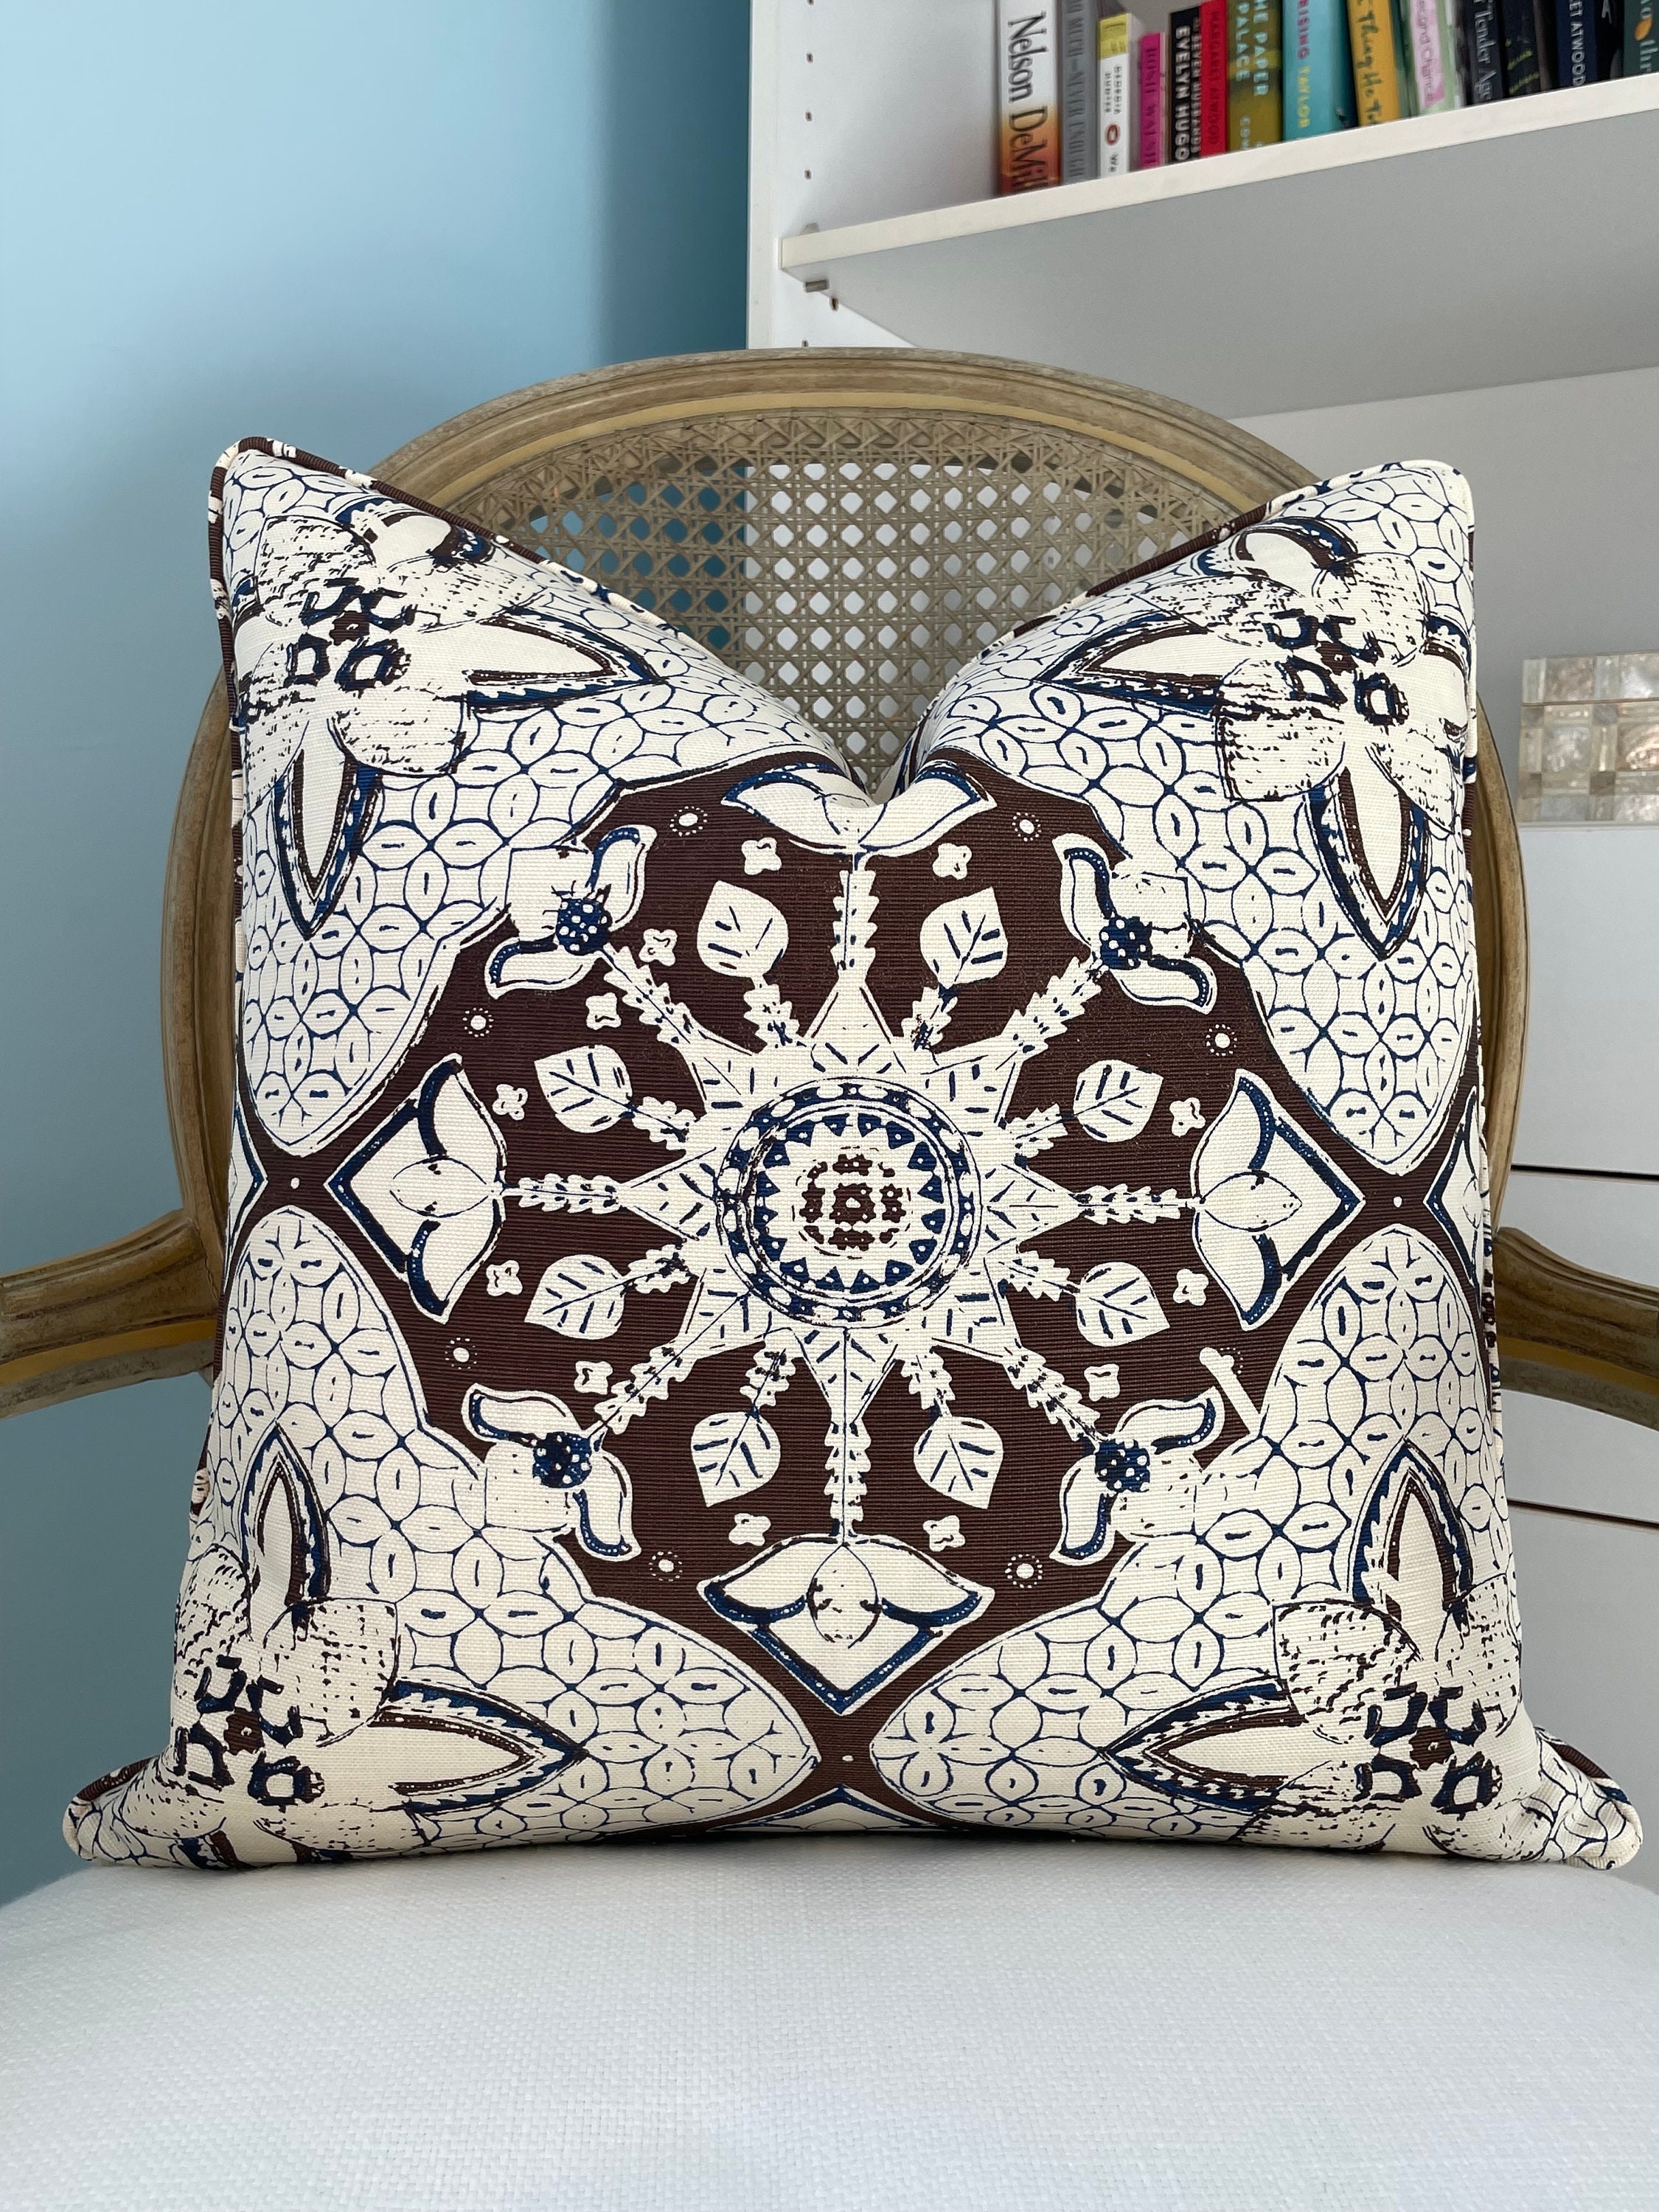 Blue White Porcelain Floral Throw Pillow Covers Vintage Chinoiserie  Decorative Pillowcase Square Cushion for Couch Bed Room 45cm - AliExpress